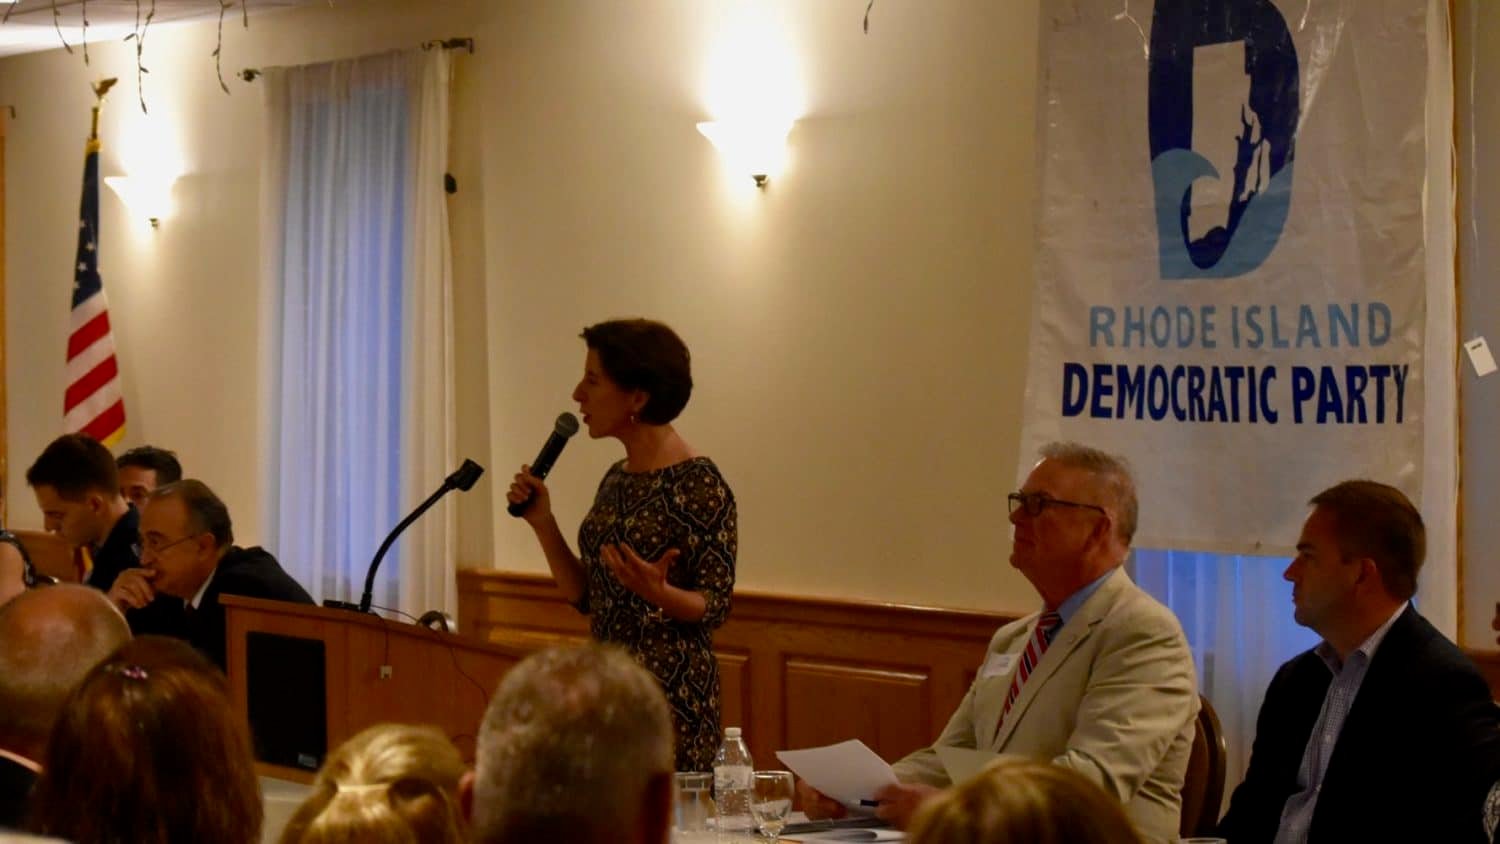 Rhode Island News: An open letter from Portsmouth Democratic Town Committee Chair Leonard Katzman on the proposed changes to the Rhode Island Democratic Party’s bylaws